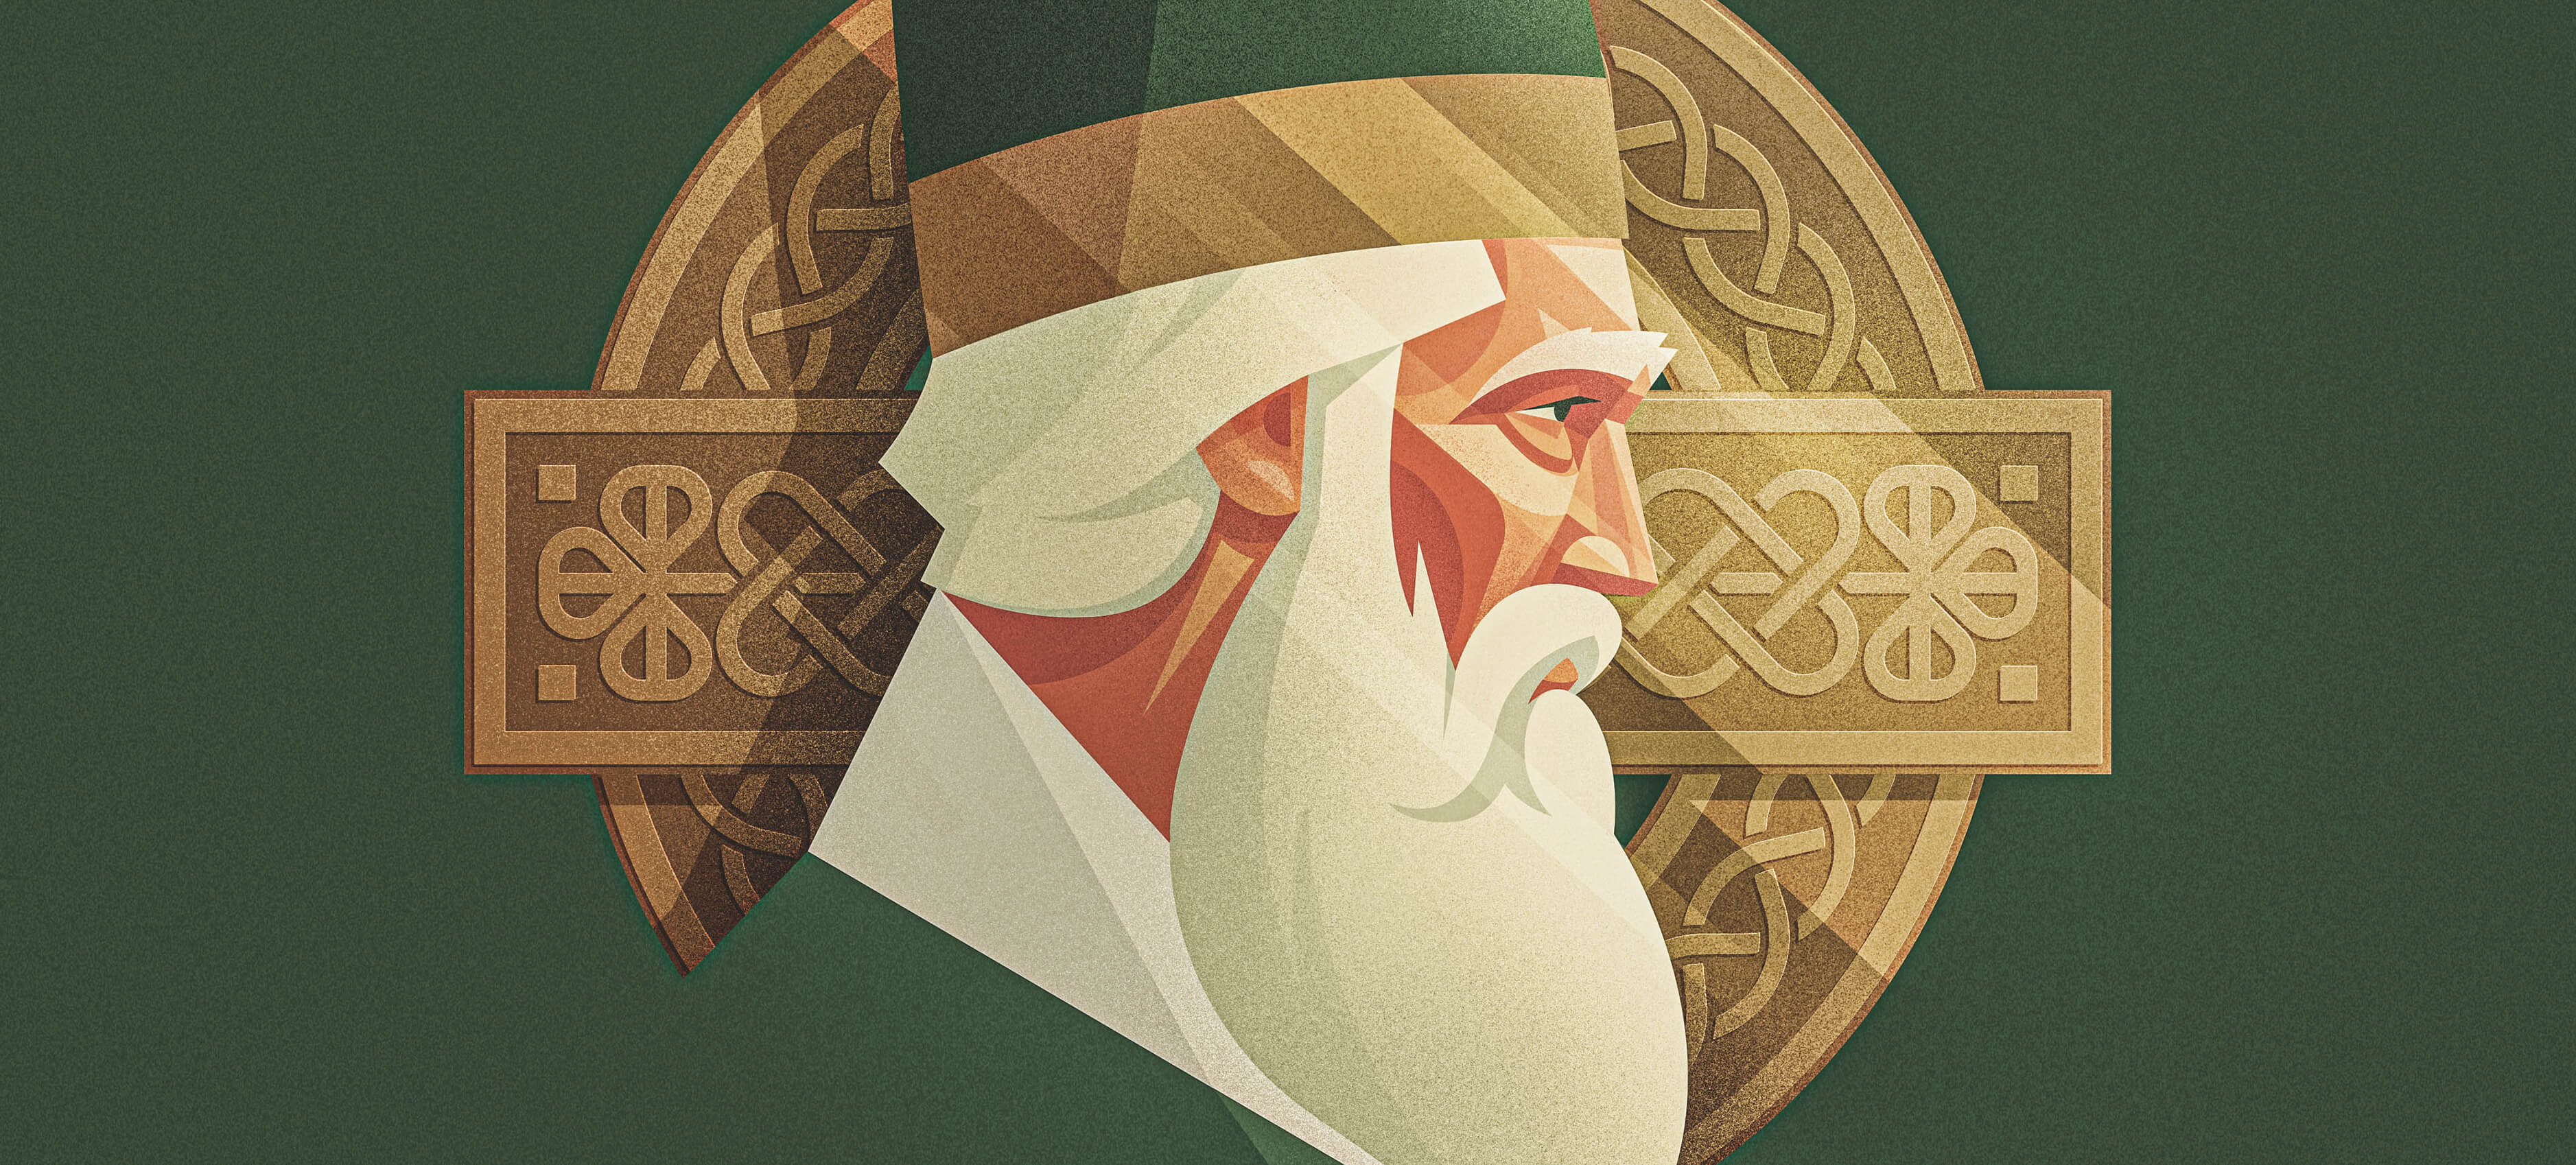 St. Patrick: The Myth and the Man